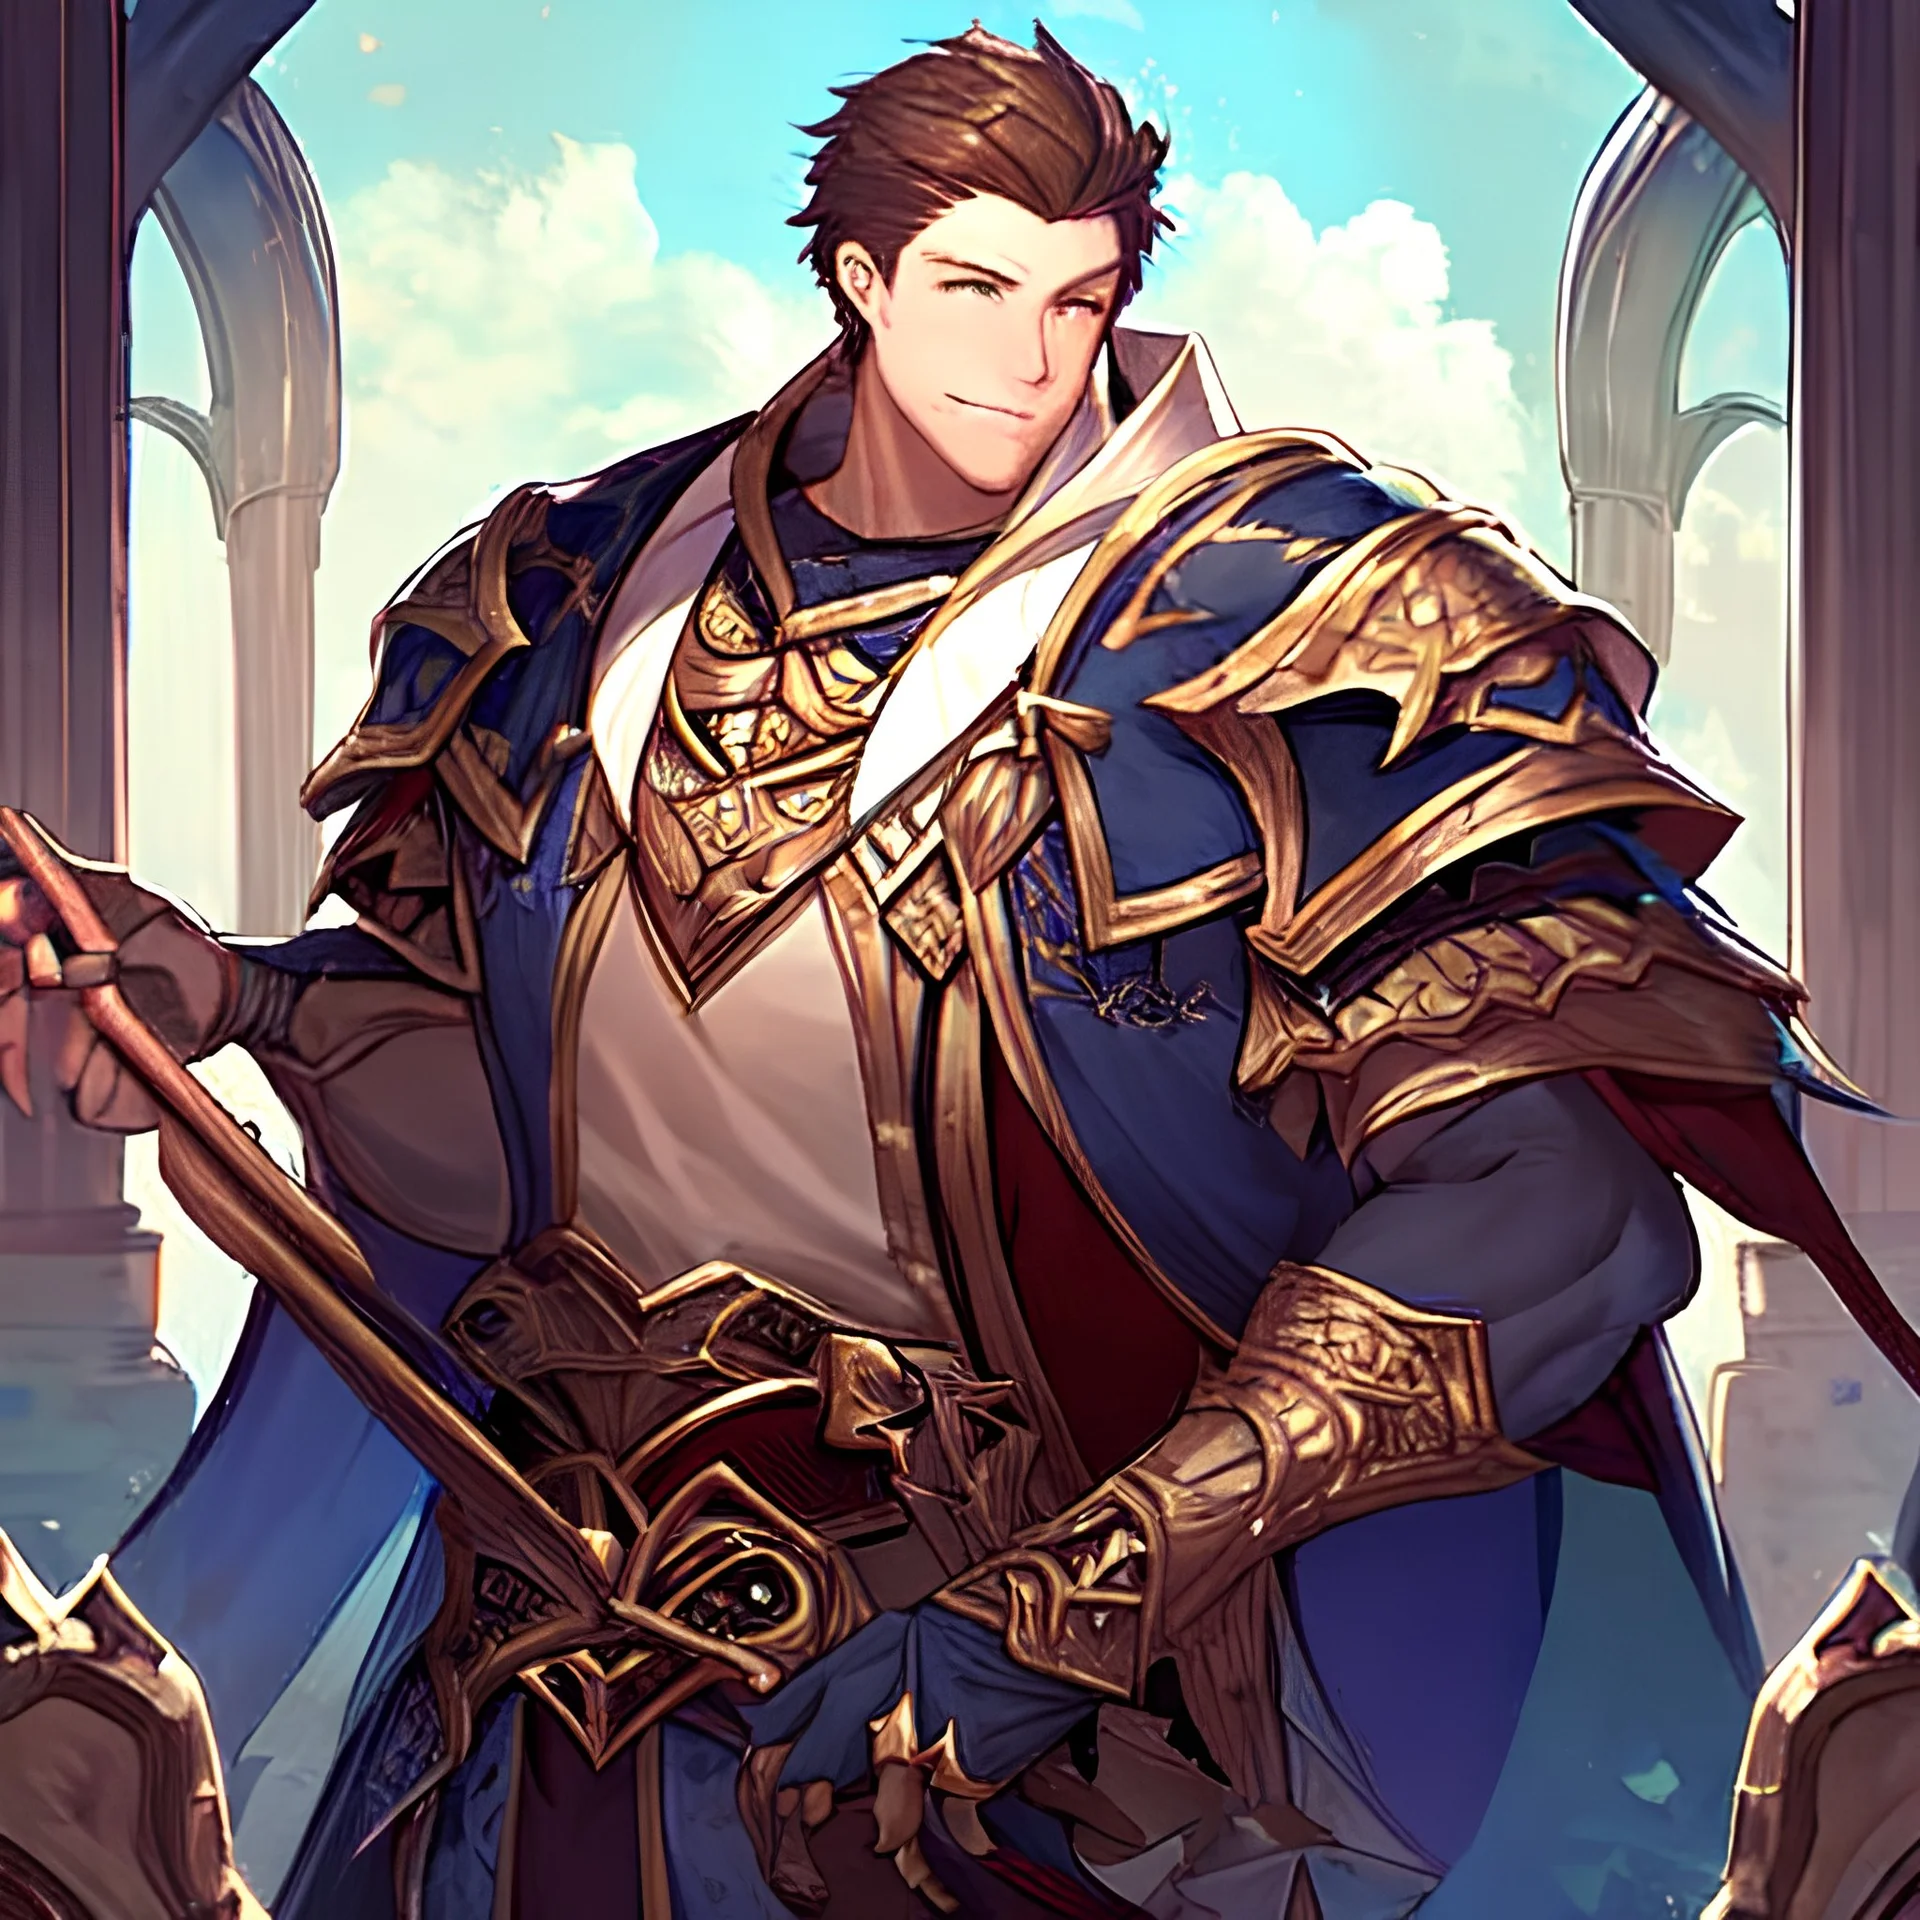 Young male fantasy soldier looks like a pretty boy holding a bow